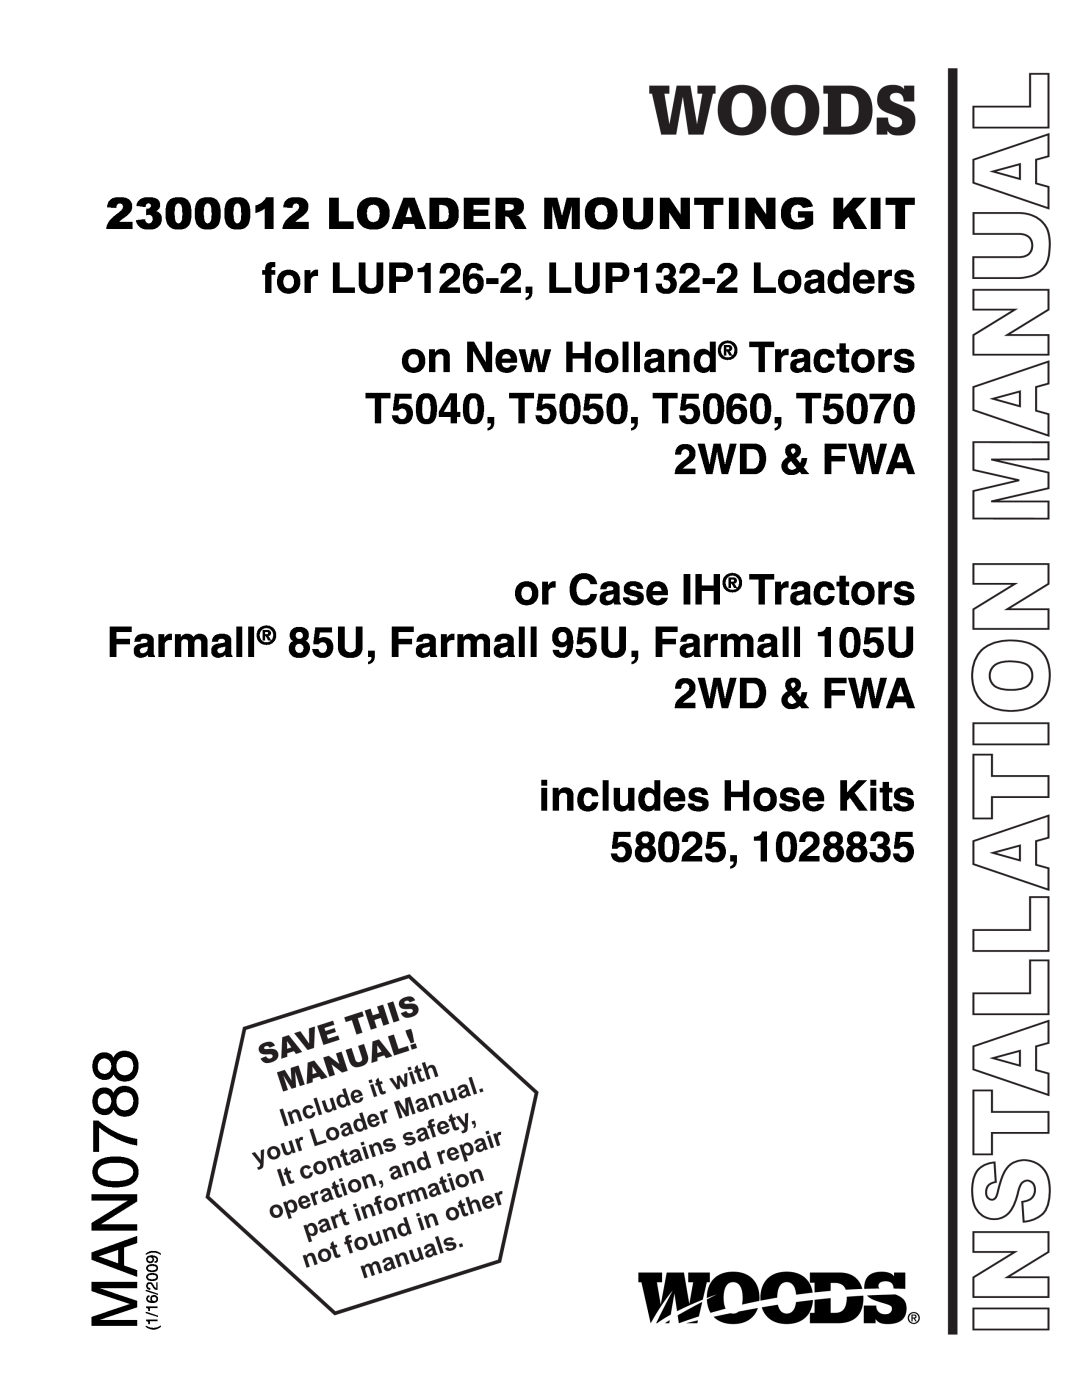 Woods Equipment T5060 installation manual MAN0788, Loader Mounting Kit, for LUP126-2, LUP132-2 Loaders, includes Hose Kits 